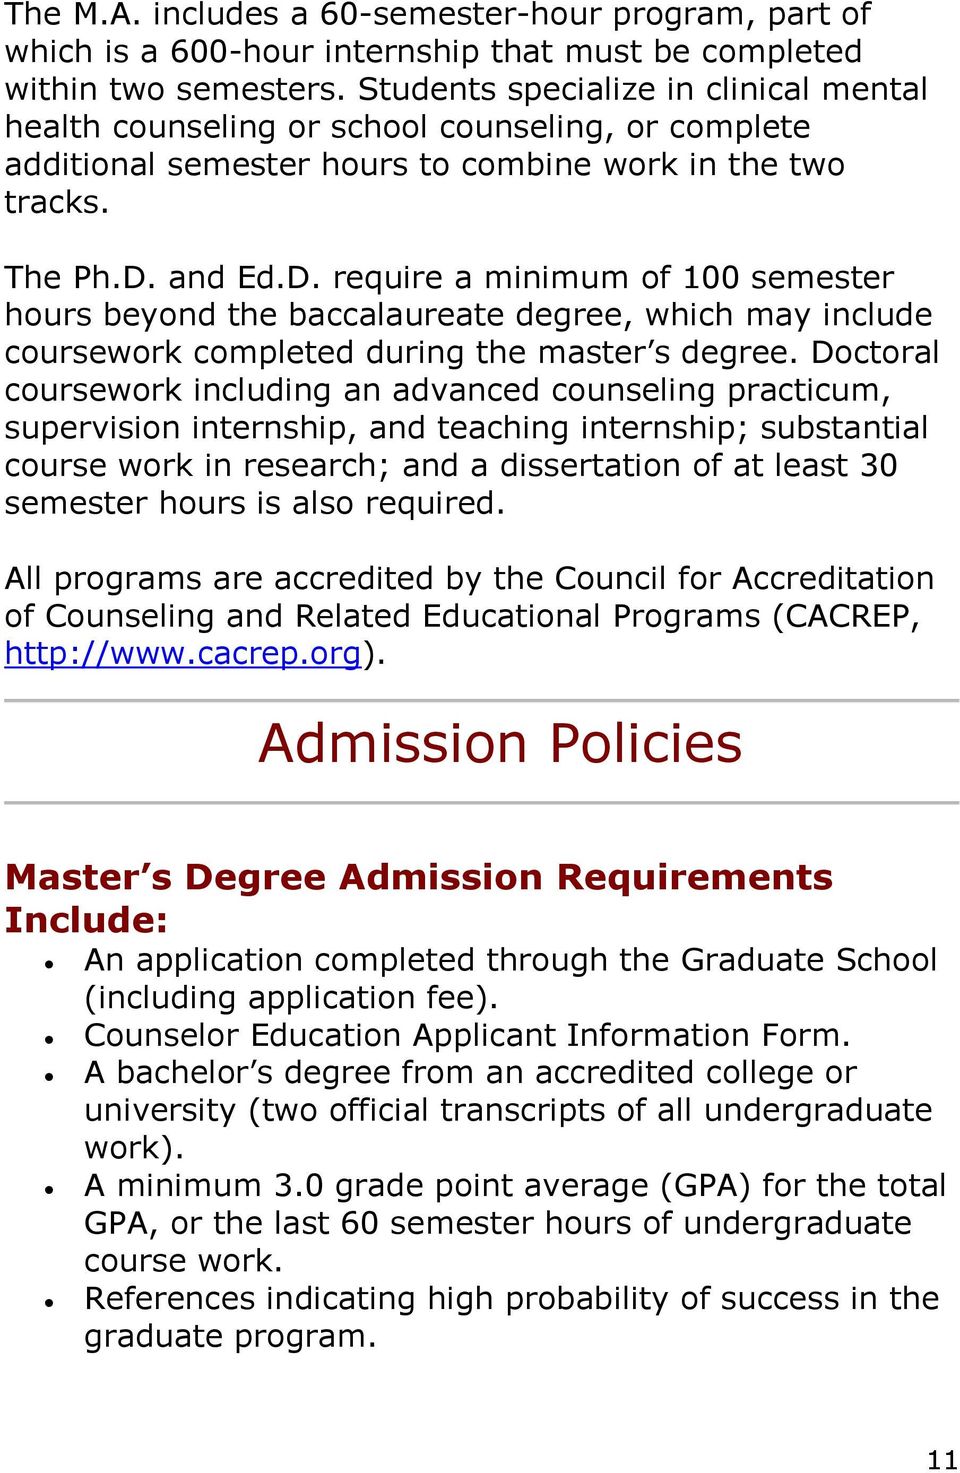 and Ed.D. require a minimum of 100 semester hours beyond the baccalaureate degree, which may include coursework completed during the master s degree.